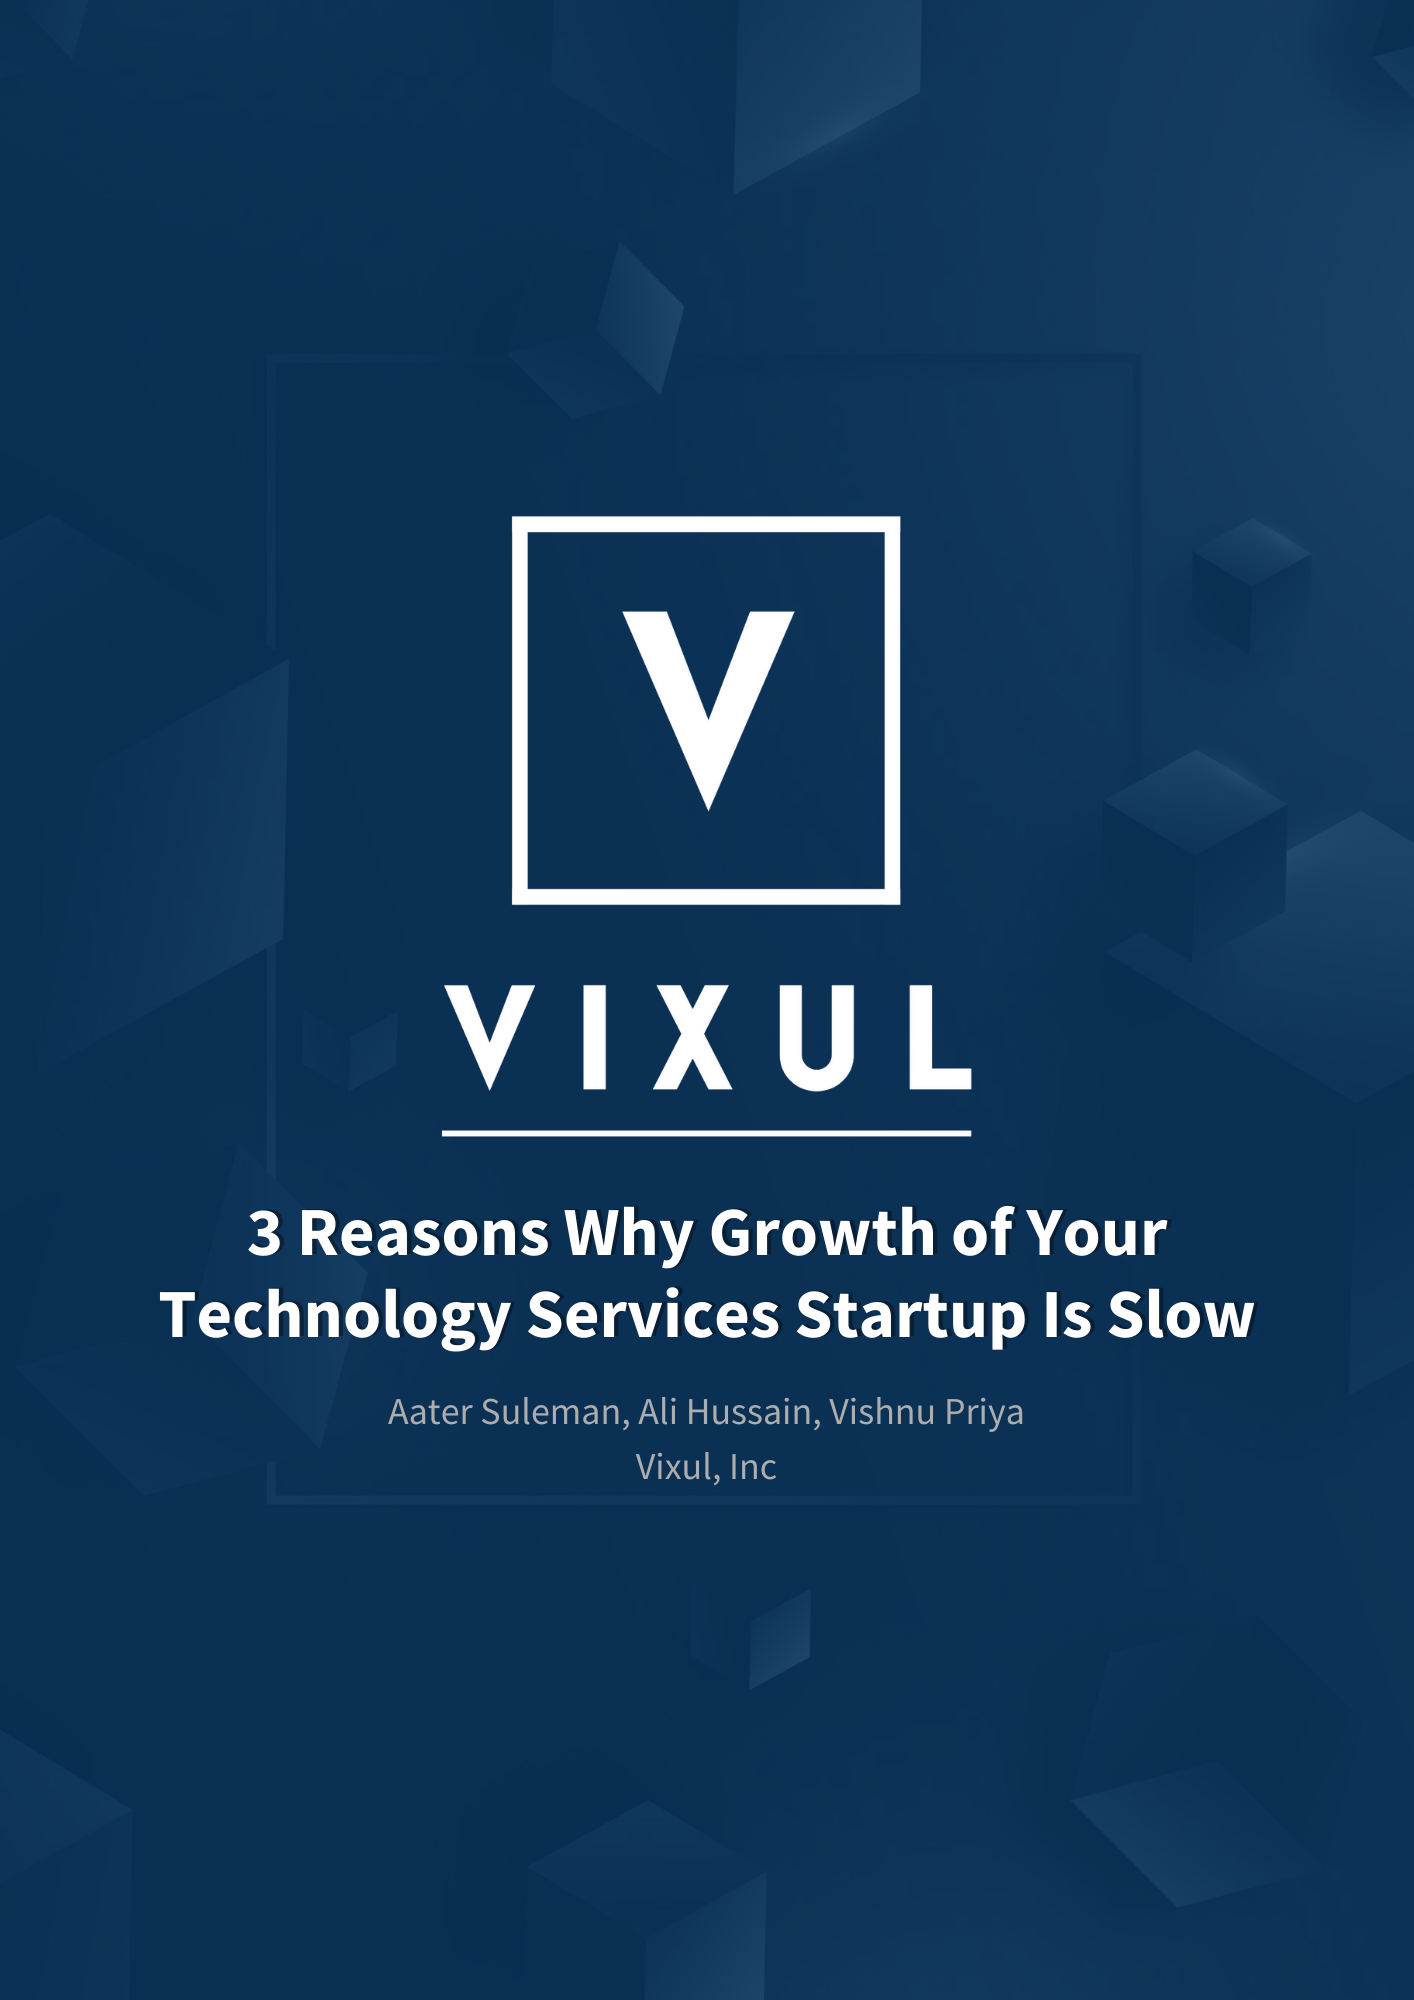 Vixul-3 Reasons Why Growth of Your Technology Services Startup Is Slow